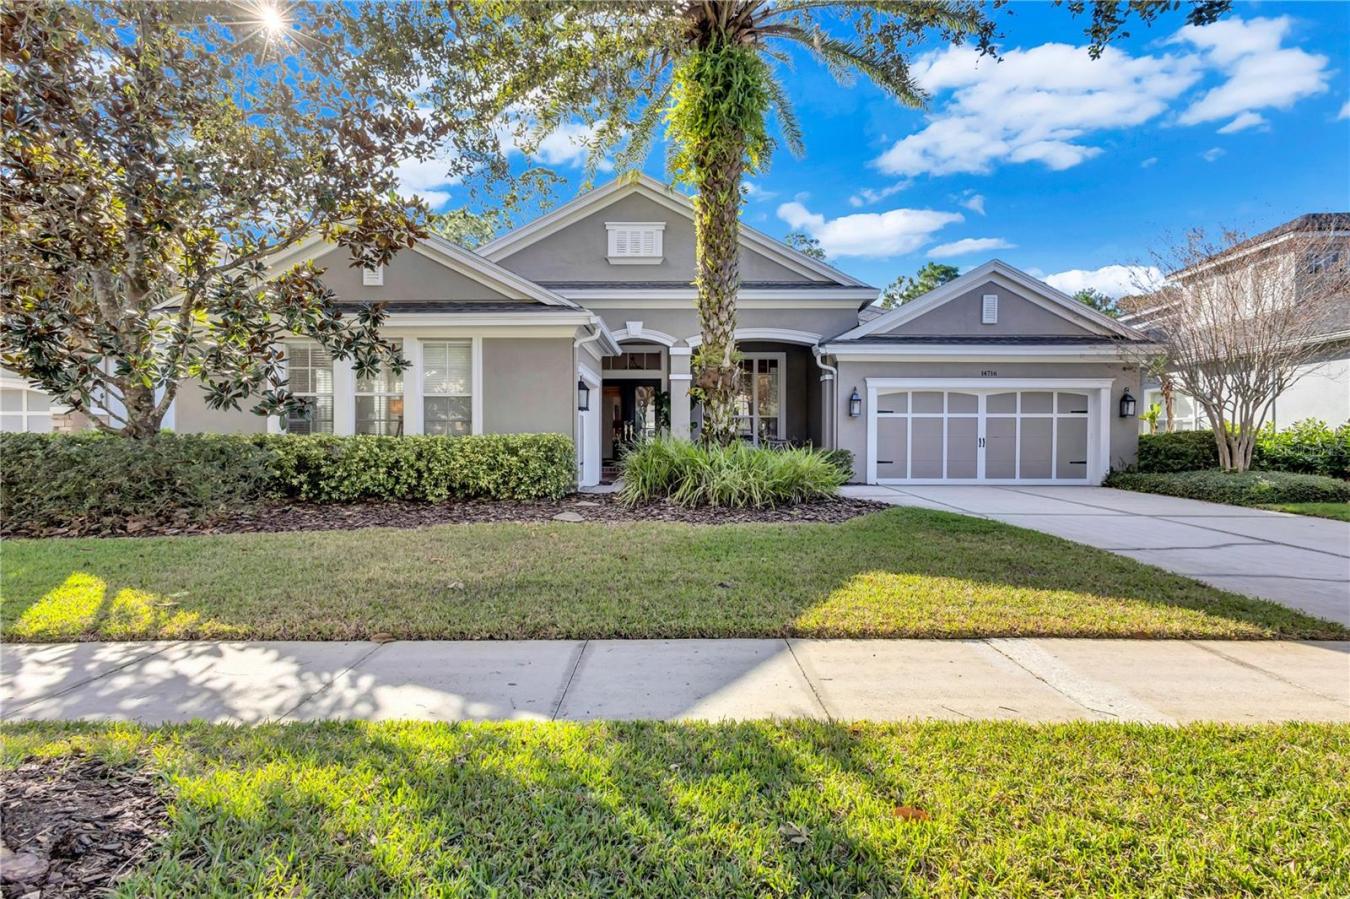 14716 TUDOR CHASE DRIVE, TAMPA, Florida, 33626, United States, 4 Bedrooms Bedrooms, ,3 BathroomsBathrooms,Residential,For Sale,14716 TUDOR CHASE DRIVE,1423315